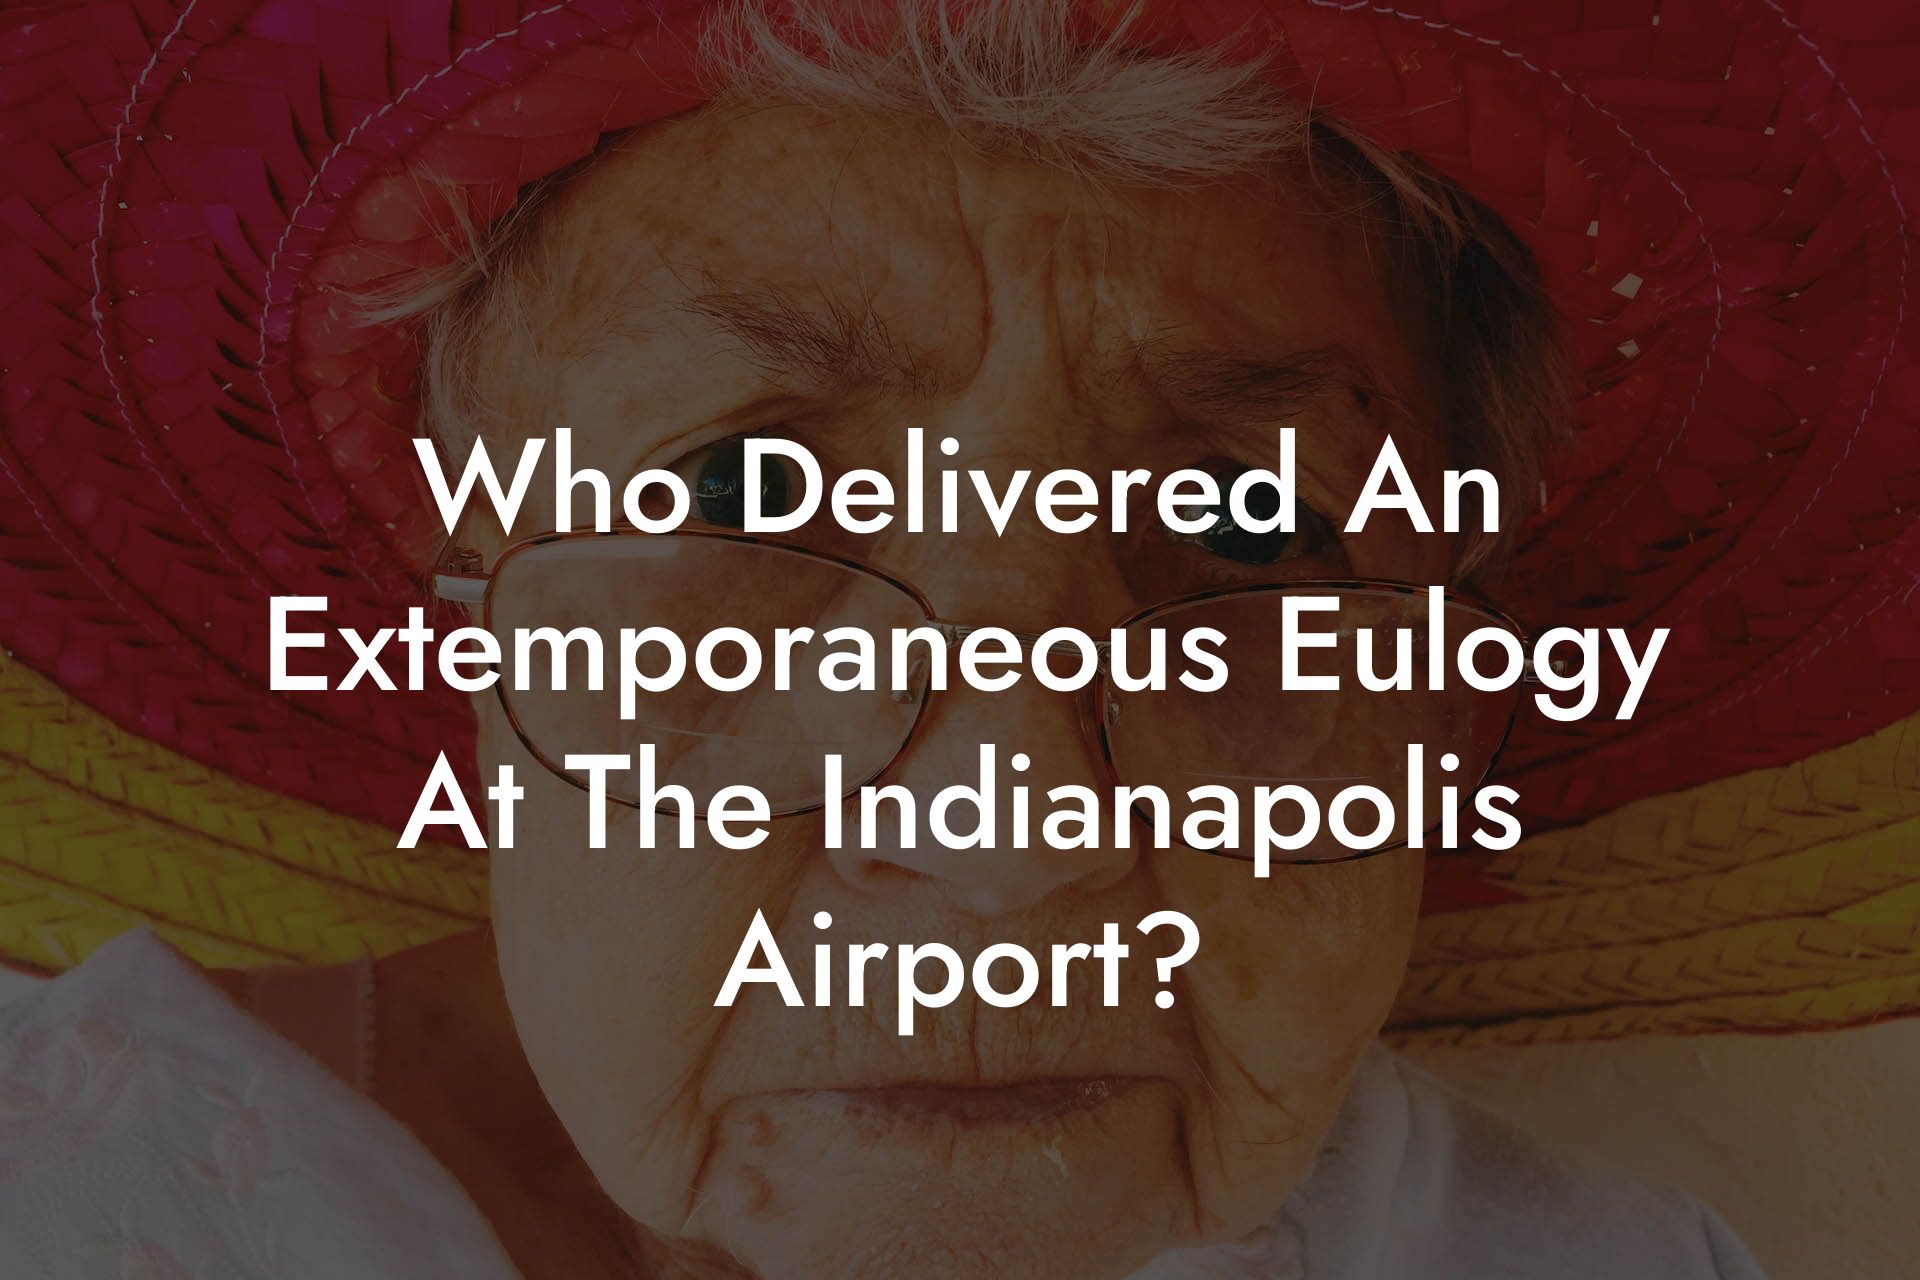 Who Delivered An Extemporaneous Eulogy At The Indianapolis Airport?